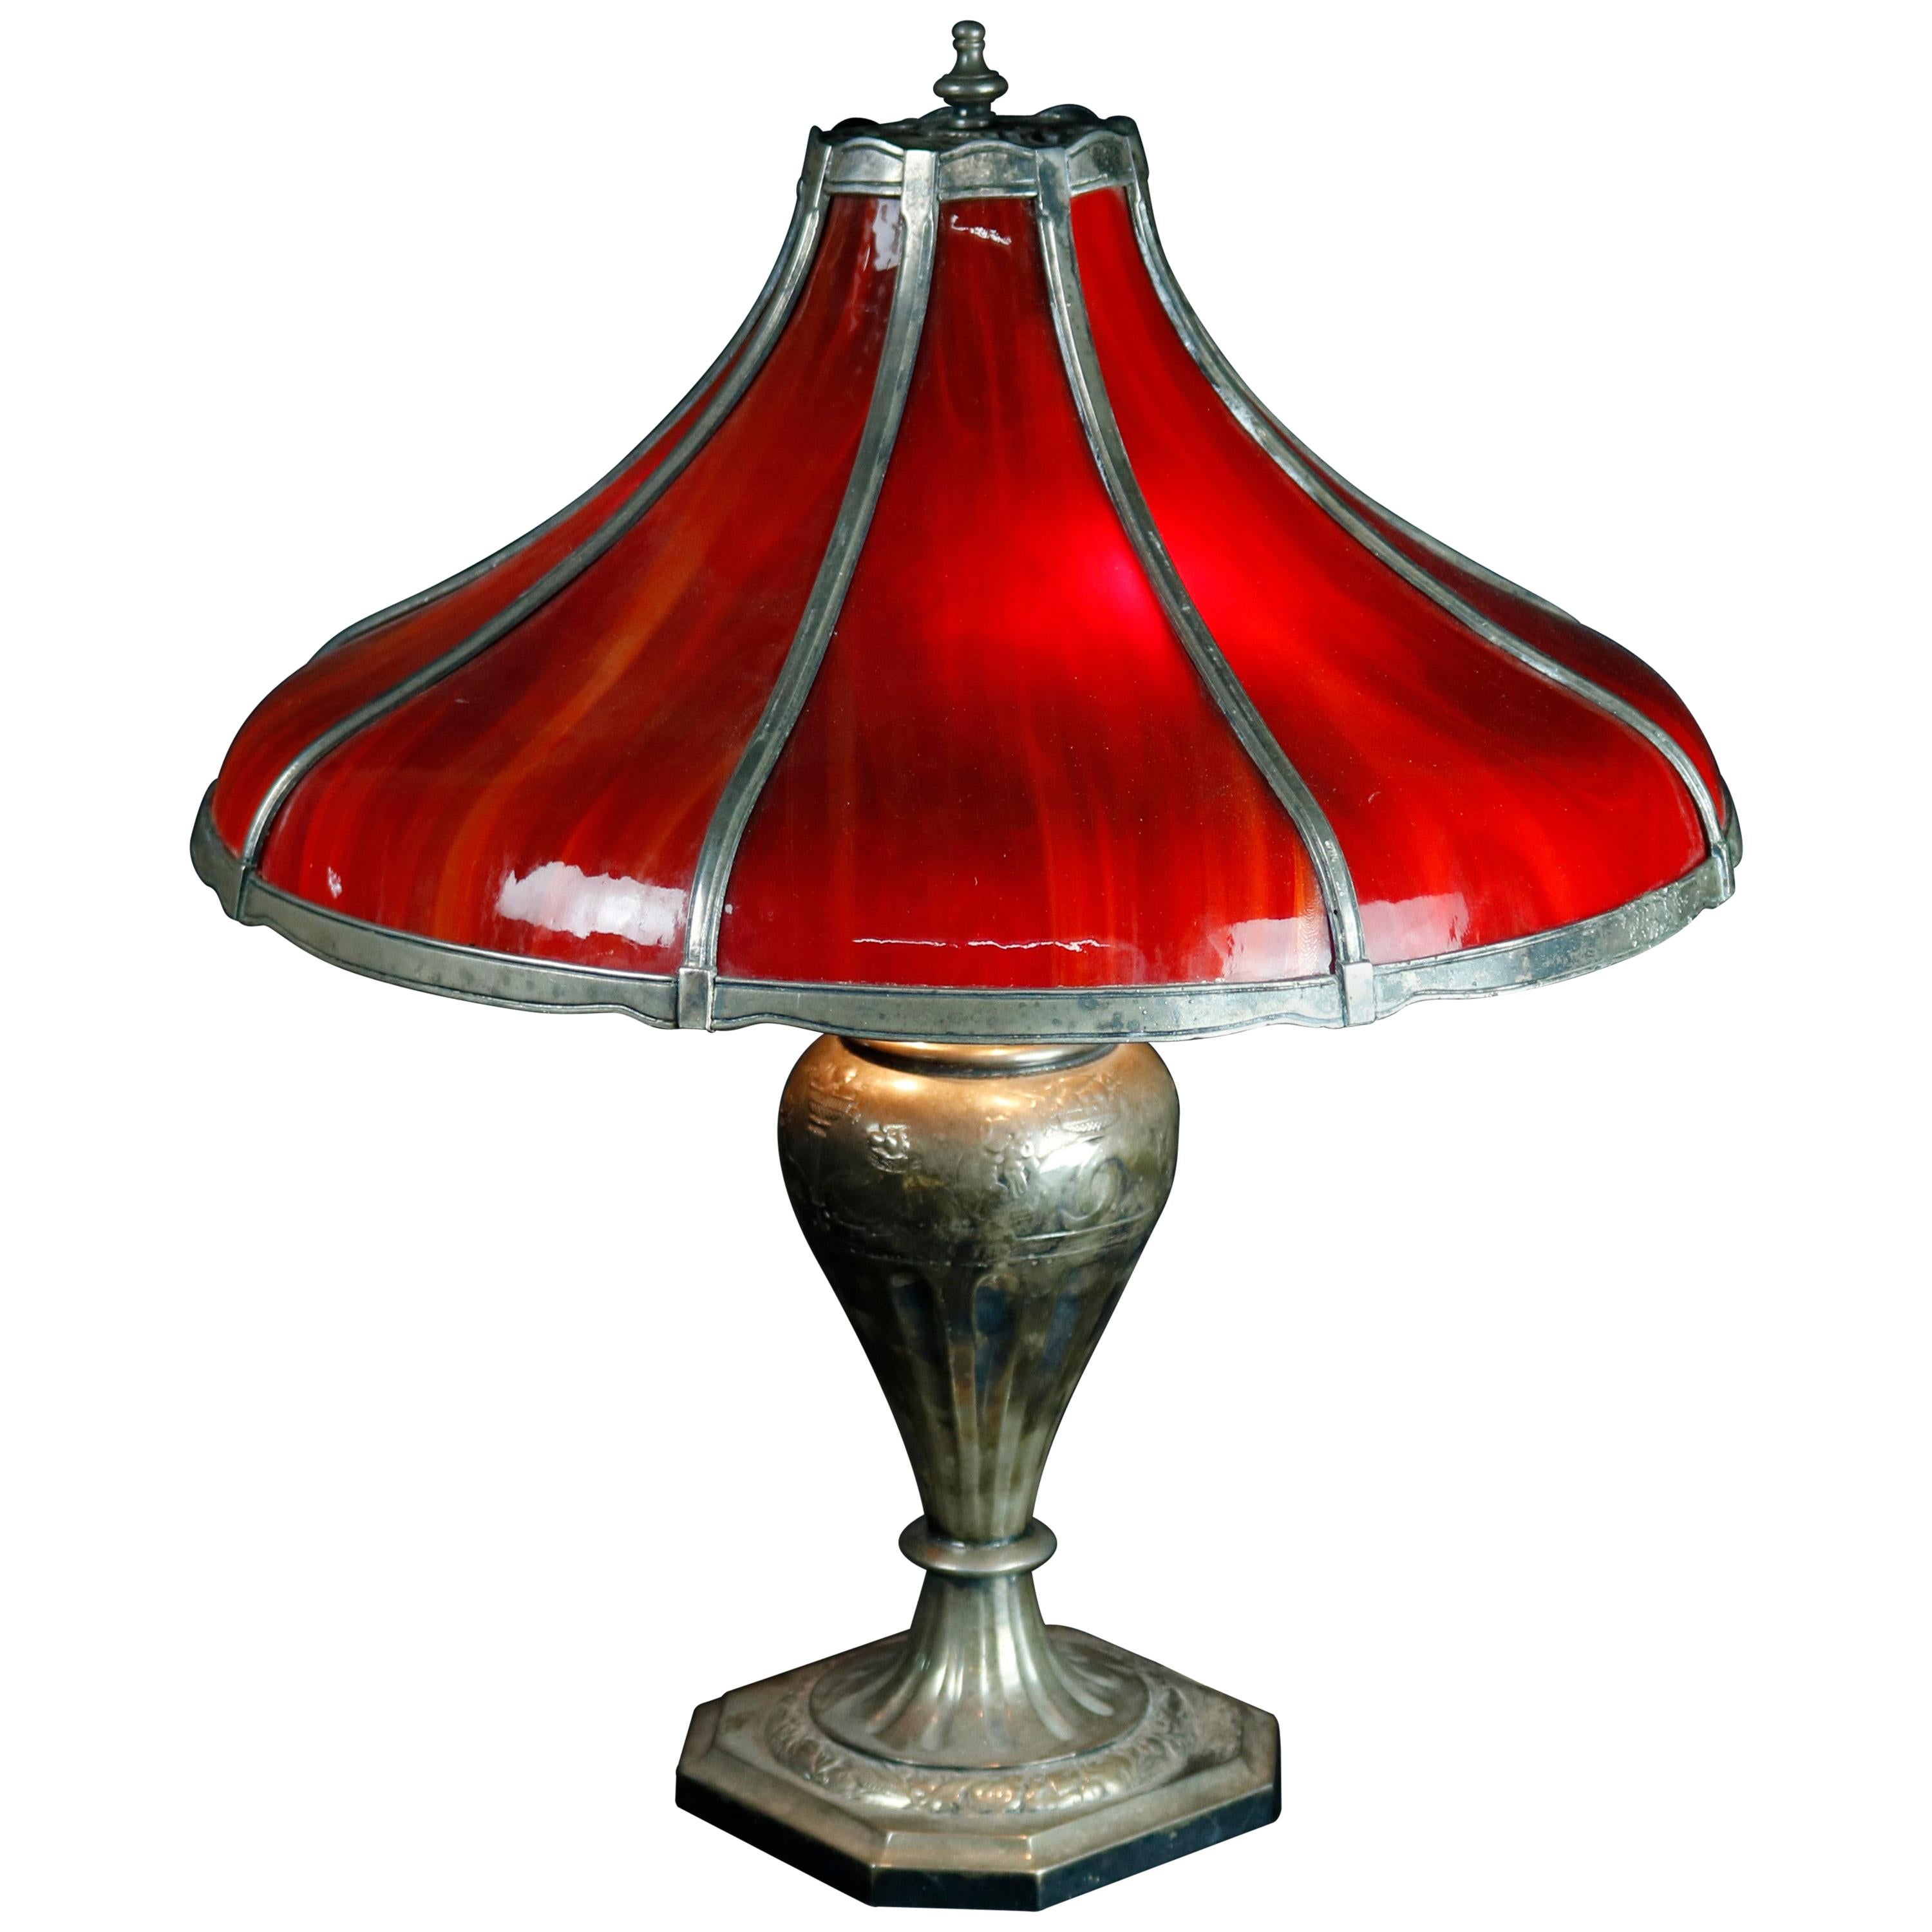 Antique Arts & Crafts Pairpoint Red Slag Glass Bent Panel Table Lamp, circa 1920